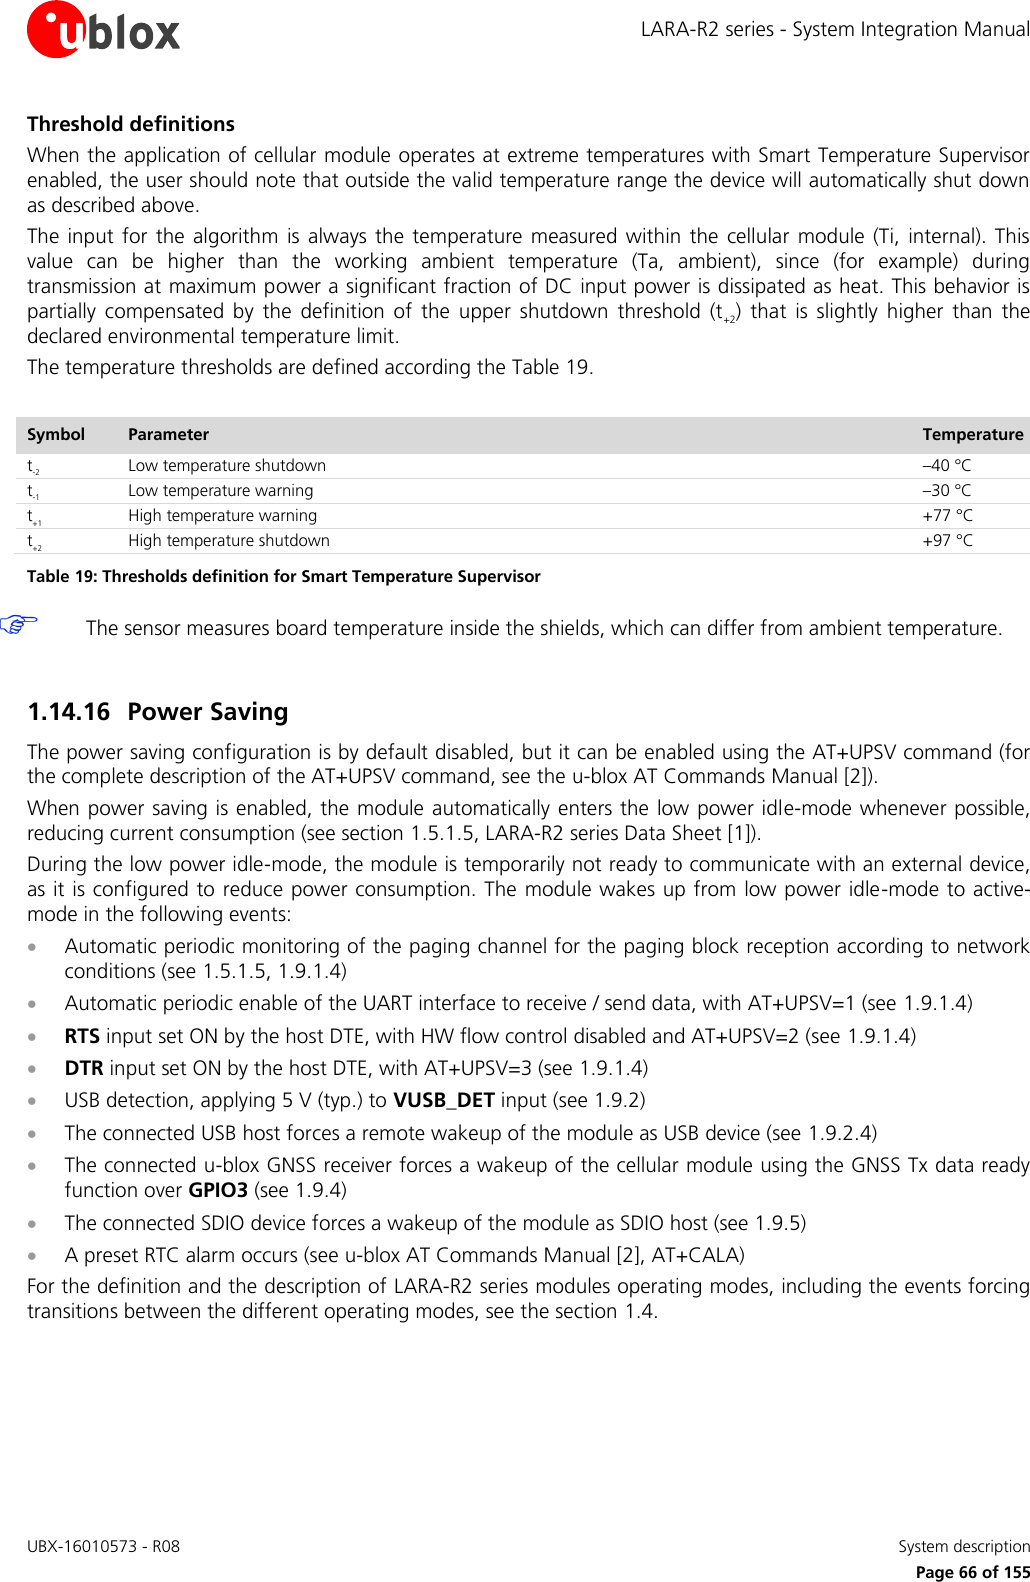 LARA-R2 series - System Integration Manual UBX-16010573 - R08    System description     Page 66 of 155 Threshold definitions When the application of cellular module operates at extreme temperatures with Smart Temperature Supervisor enabled, the user should note that outside the valid temperature range the device will automatically shut down as described above. The  input  for  the algorithm is  always  the  temperature  measured  within the  cellular  module  (Ti,  internal). This value  can  be  higher  than  the  working  ambient  temperature  (Ta,  ambient),  since  (for  example)  during transmission at maximum power a significant fraction of DC input power is dissipated as heat. This behavior is partially  compensated  by  the  definition  of  the  upper  shutdown  threshold  (t+2)  that  is  slightly  higher  than  the declared environmental temperature limit. The temperature thresholds are defined according the Table 19.  Symbol Parameter Temperature t-2 Low temperature shutdown –40 °C t-1 Low temperature warning –30 °C t+1 High temperature warning +77 °C t+2 High temperature shutdown +97 °C Table 19: Thresholds definition for Smart Temperature Supervisor  The sensor measures board temperature inside the shields, which can differ from ambient temperature.  1.14.16 Power Saving The power saving configuration is by default disabled, but it can be enabled using the AT+UPSV command (for the complete description of the AT+UPSV command, see the u-blox AT Commands Manual [2]). When power saving is enabled, the module automatically enters the  low power idle-mode whenever possible, reducing current consumption (see section 1.5.1.5, LARA-R2 series Data Sheet [1]). During the low power idle-mode, the module is temporarily not ready to communicate with an external device, as it is configured to reduce power consumption. The module wakes up from  low power idle-mode to active-mode in the following events:  Automatic periodic monitoring of the paging channel for the paging block reception according to network conditions (see 1.5.1.5, 1.9.1.4)  Automatic periodic enable of the UART interface to receive / send data, with AT+UPSV=1 (see 1.9.1.4)   RTS input set ON by the host DTE, with HW flow control disabled and AT+UPSV=2 (see 1.9.1.4)   DTR input set ON by the host DTE, with AT+UPSV=3 (see 1.9.1.4)   USB detection, applying 5 V (typ.) to VUSB_DET input (see 1.9.2)  The connected USB host forces a remote wakeup of the module as USB device (see 1.9.2.4)  The connected u-blox GNSS receiver forces a wakeup of the cellular module using the GNSS Tx data ready function over GPIO3 (see 1.9.4)  The connected SDIO device forces a wakeup of the module as SDIO host (see 1.9.5)  A preset RTC alarm occurs (see u-blox AT Commands Manual [2], AT+CALA) For the definition and the description of LARA-R2 series modules operating modes, including the events forcing transitions between the different operating modes, see the section 1.4.  